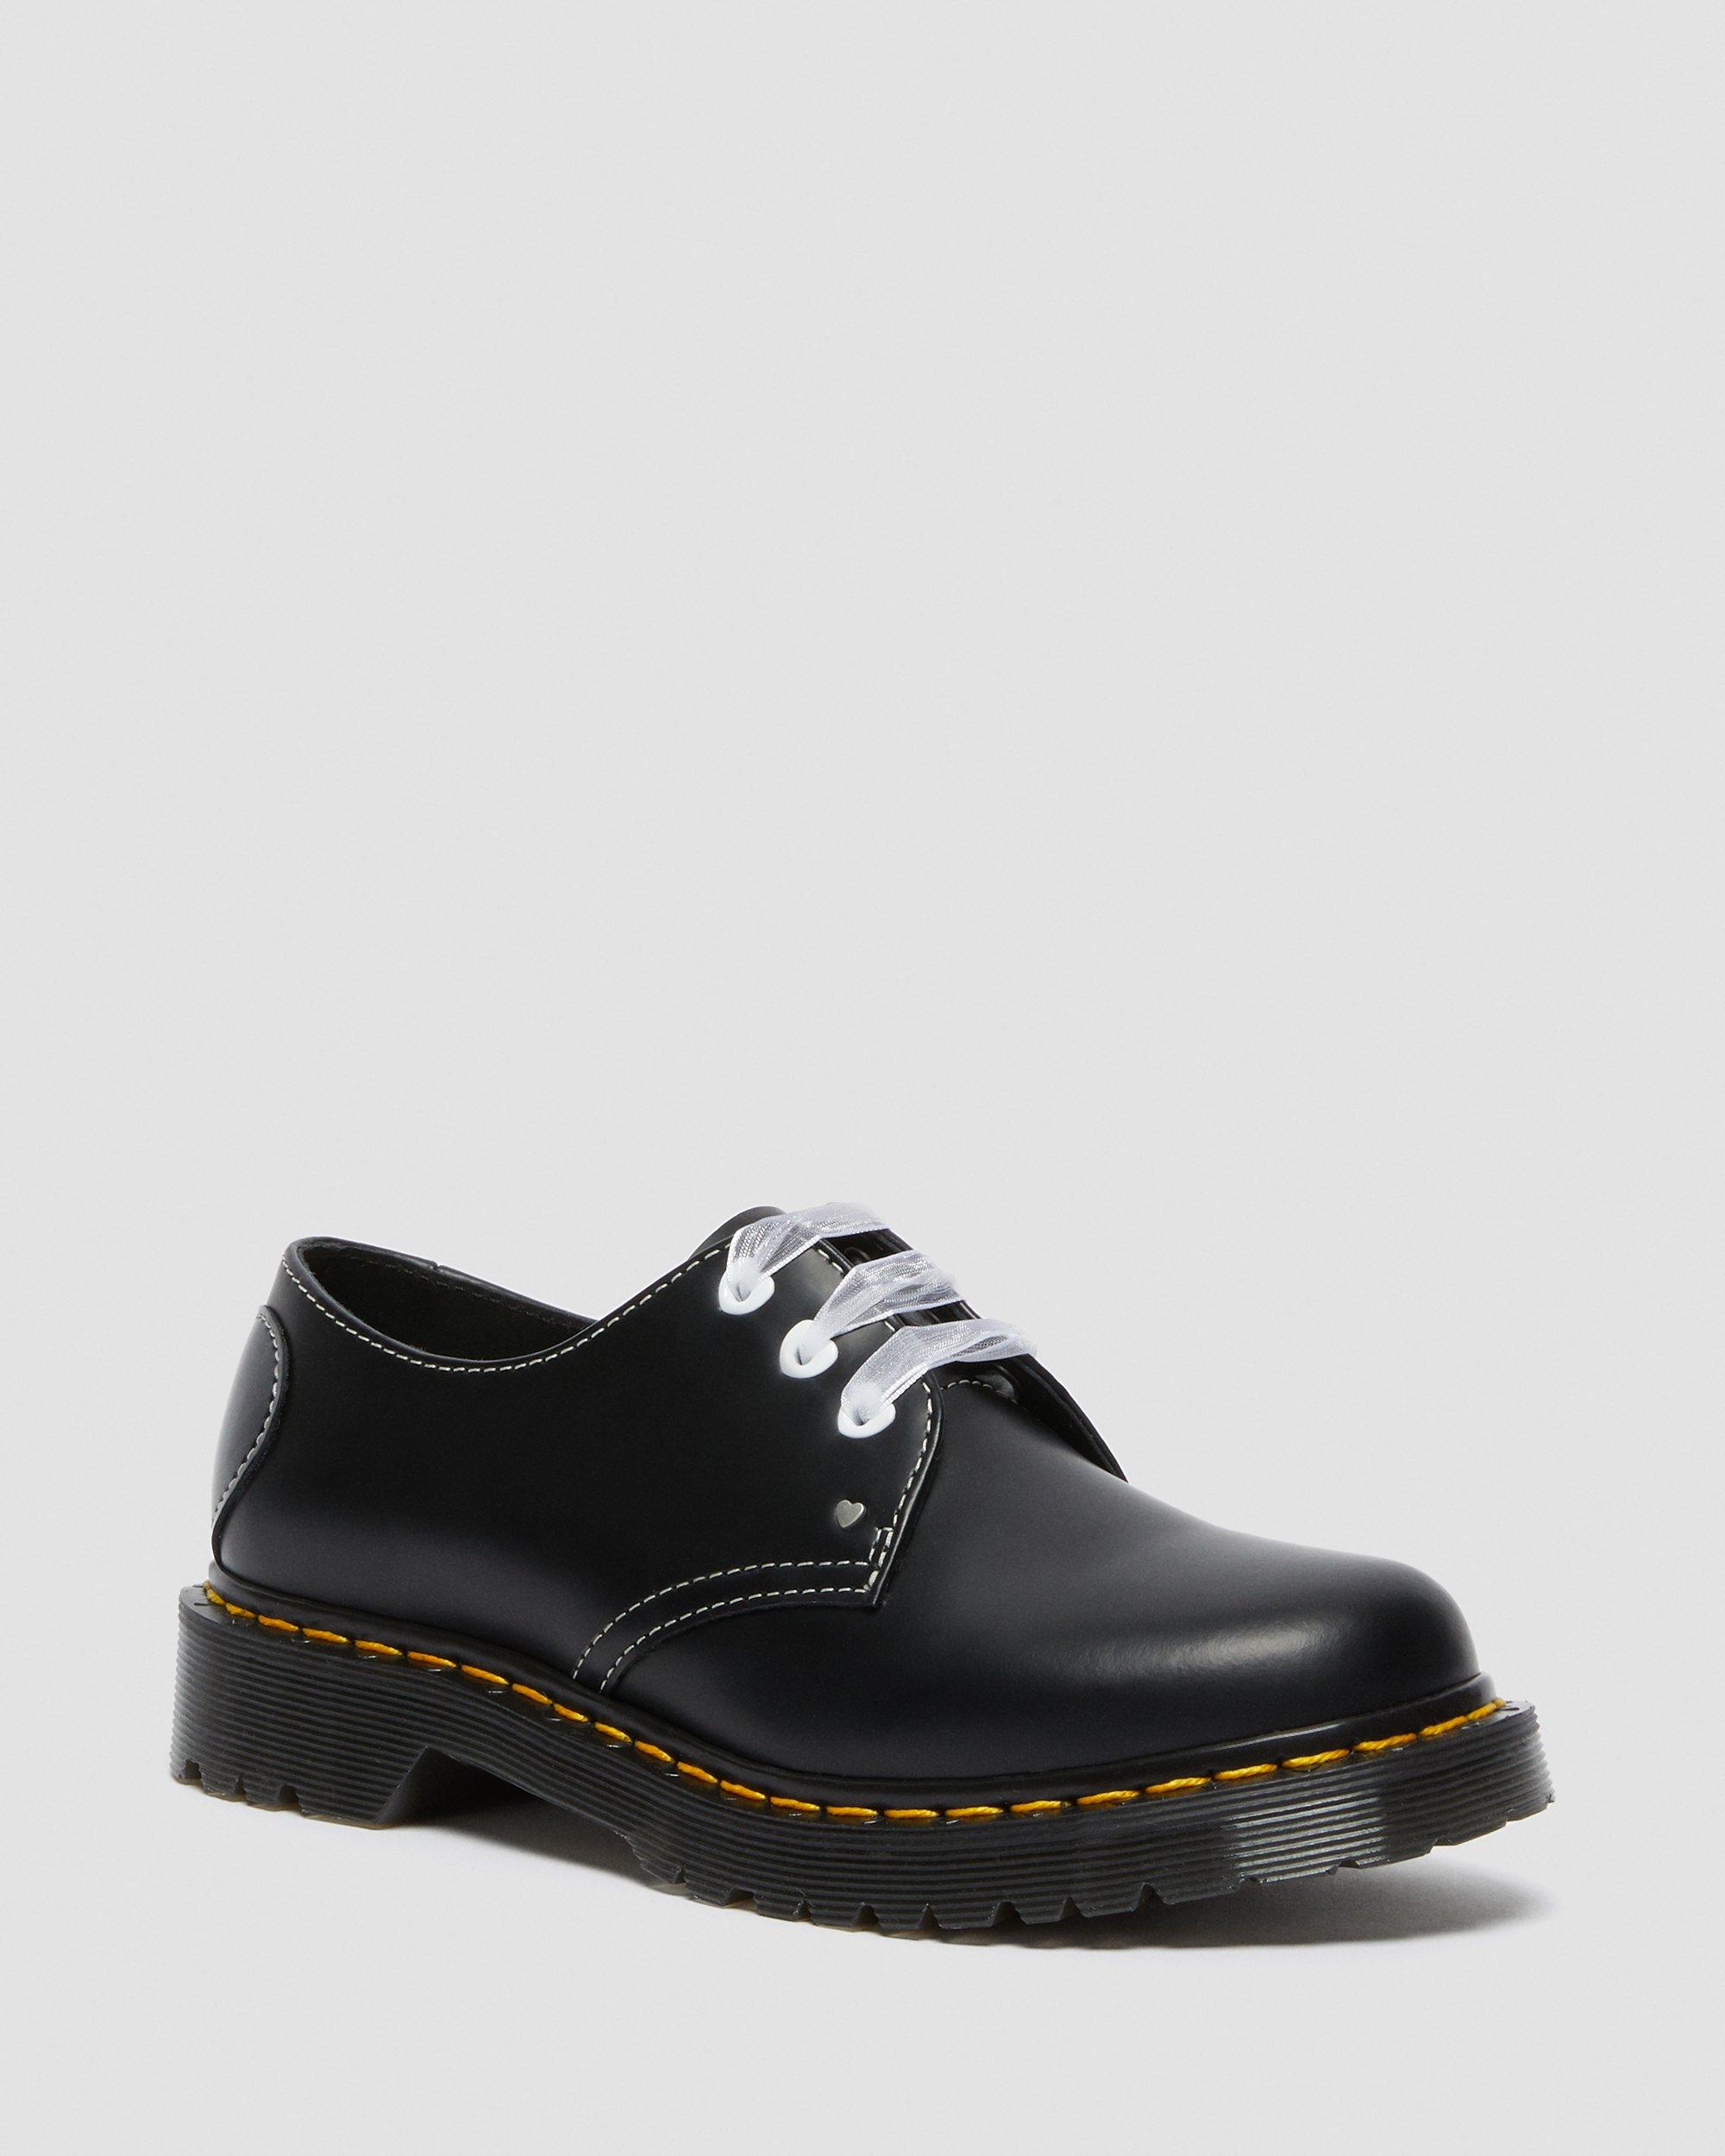 DR MARTENS 1461 Hearts Smooth & Patent Leather Shoes